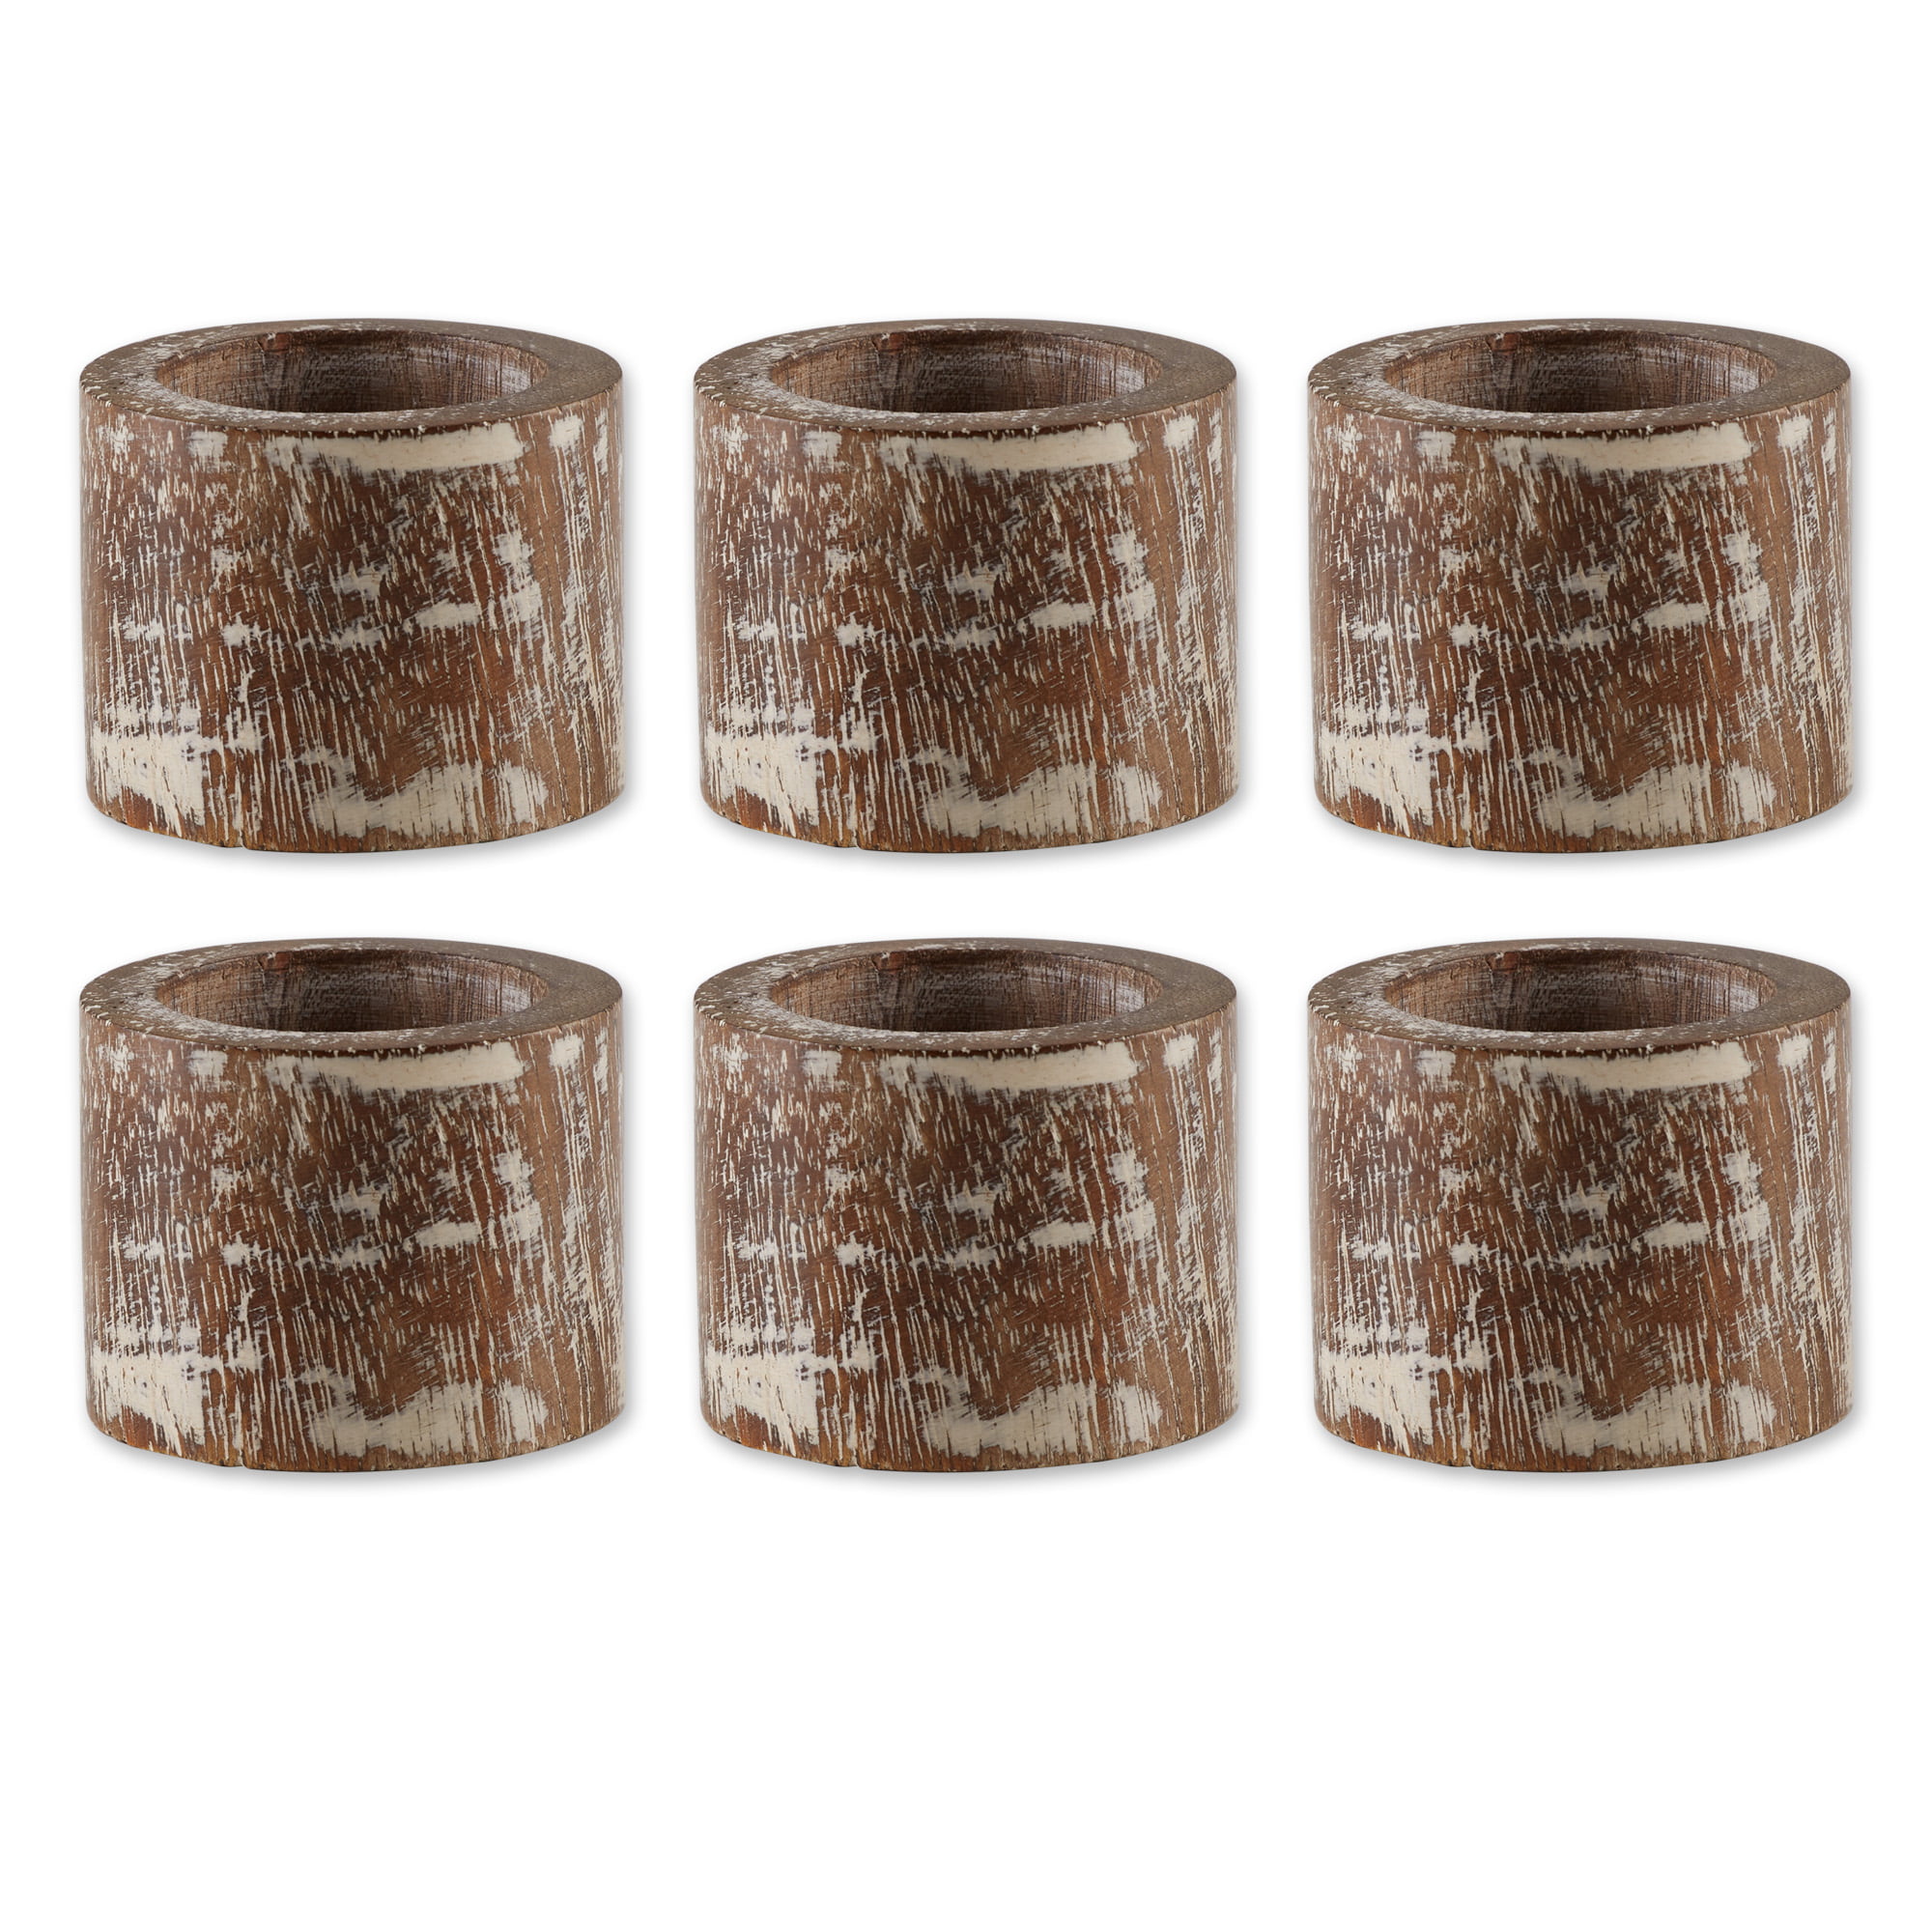 Set of 6 Artisan Crafted Rustic Mango Wood Napkin Rings for Table Decoration